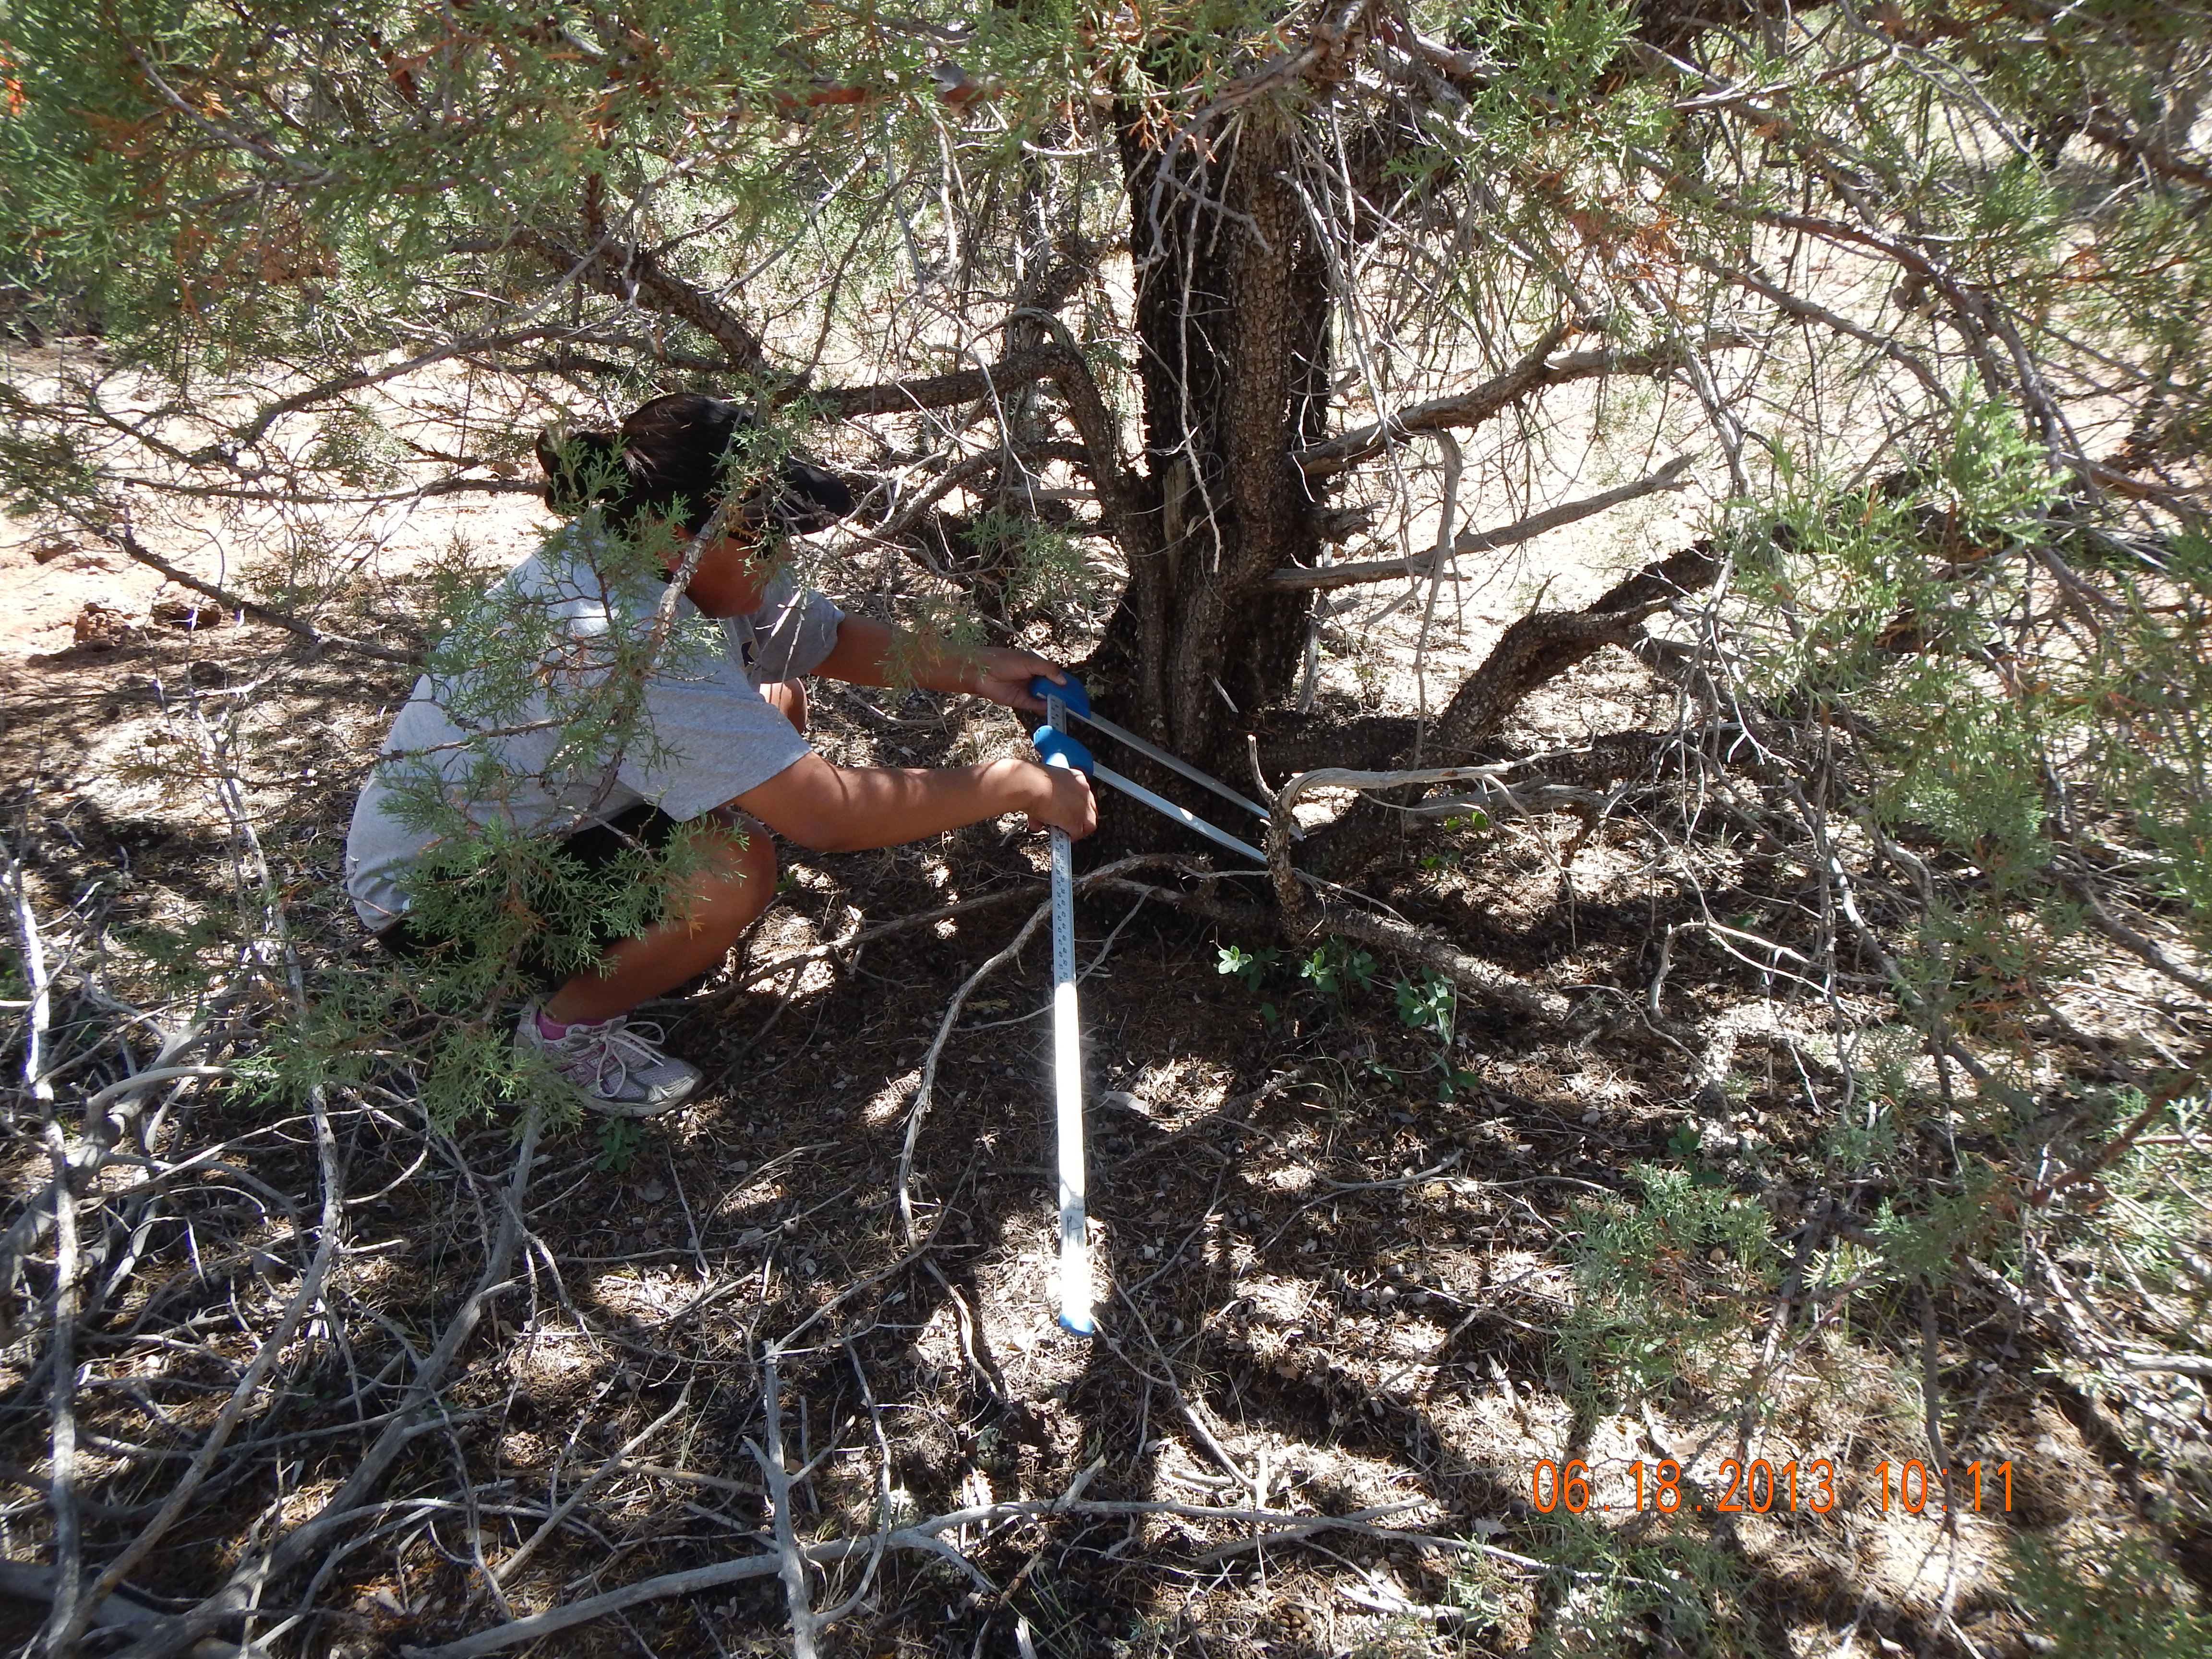 Northern Arizona University graduate student Terri Victor measures forest structural attributes as part of an internship sponsored by the USGS Student Interns in Support of Native American Relations (SISNAR) program.